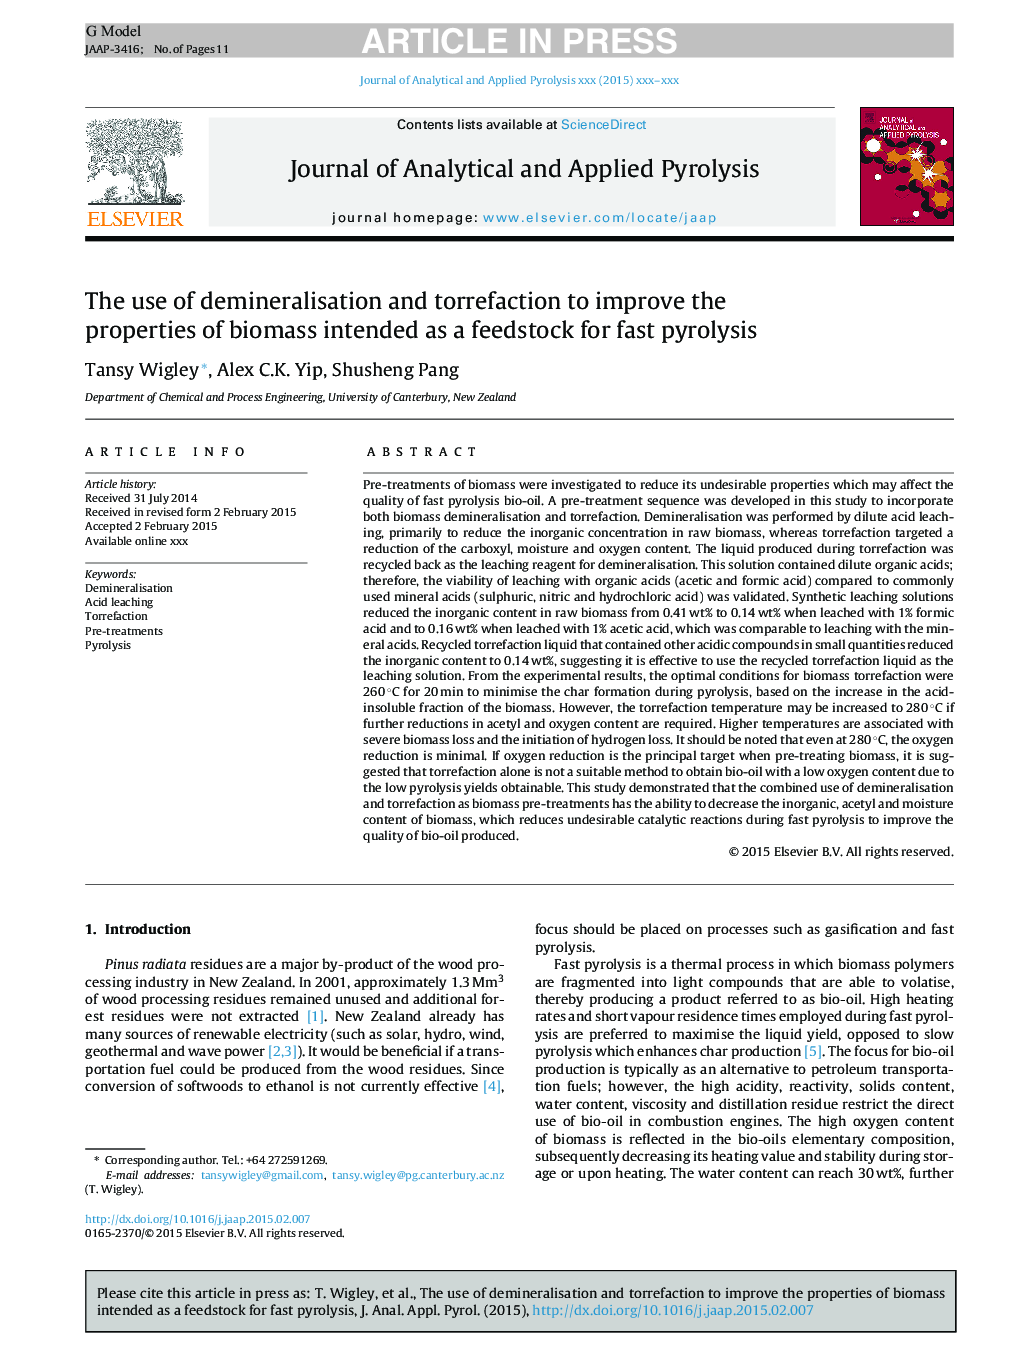 The use of demineralisation and torrefaction to improve the properties of biomass intended as a feedstock for fast pyrolysis